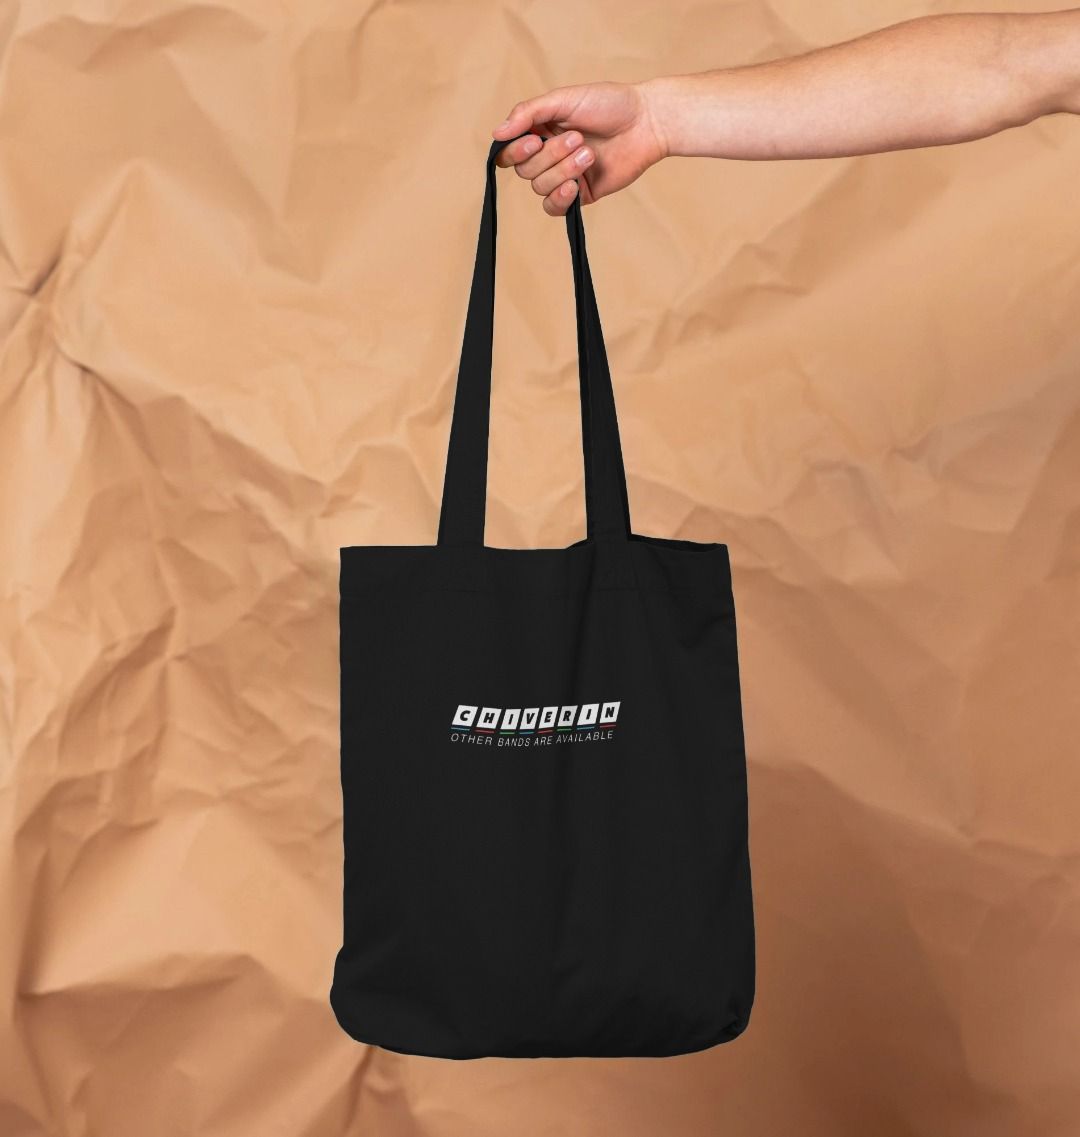 Other Bands Tote Bag